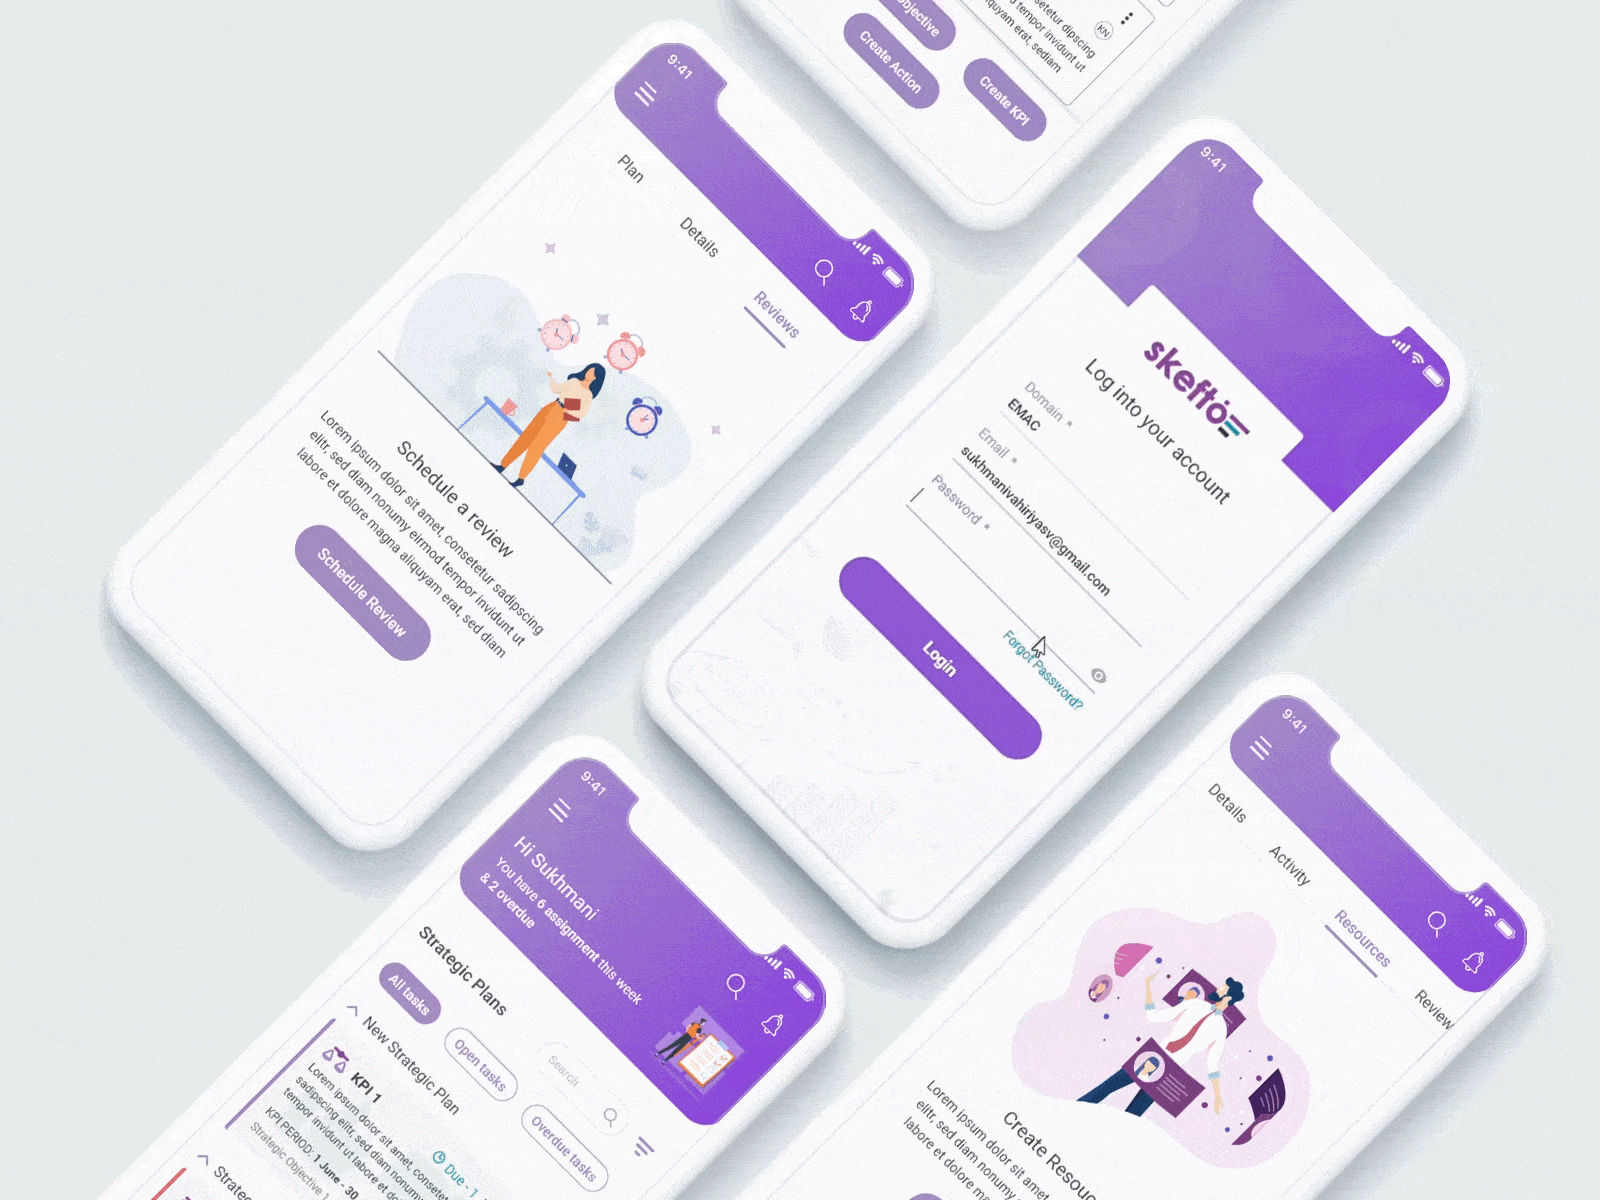 Interactions to make it interactive animated gif animation app clean gradient mobile mobile app mobile design mobile ui modern motion purple sleek sleekdesign smooth animation soothing